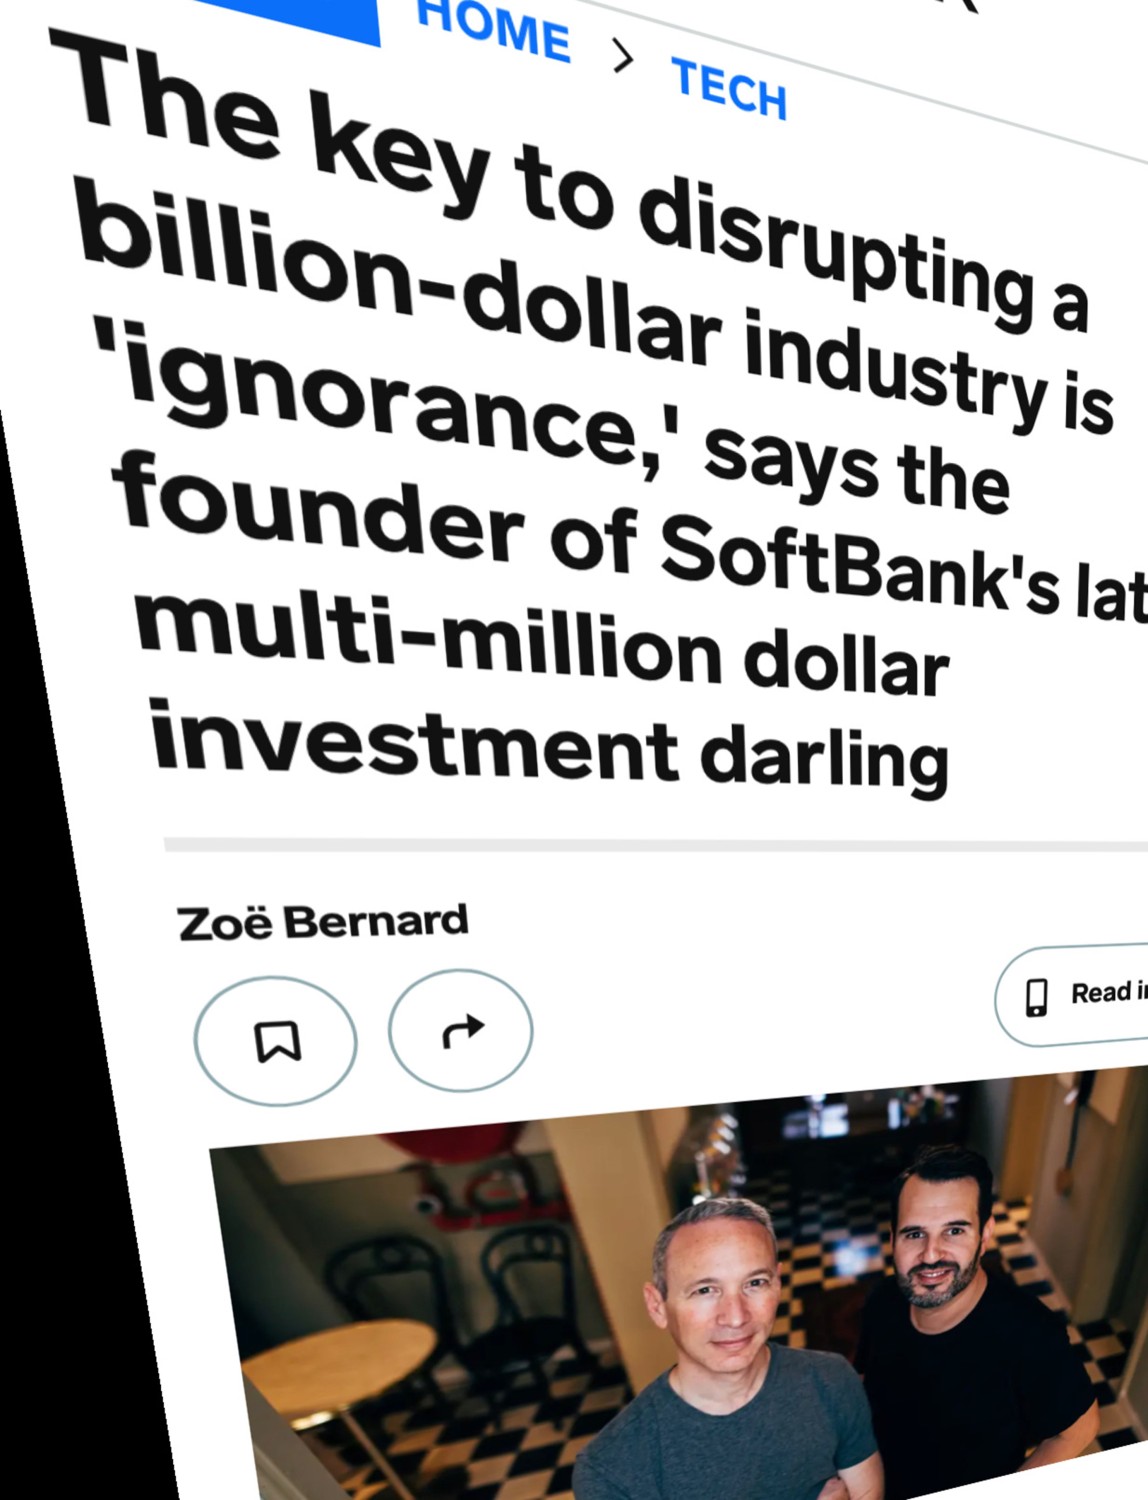 article headline that reads, "The key to disrupting a billion-dollar industry is 'ignorance,' says the founder of SoftBank's latest multi-million dollar investment darling"